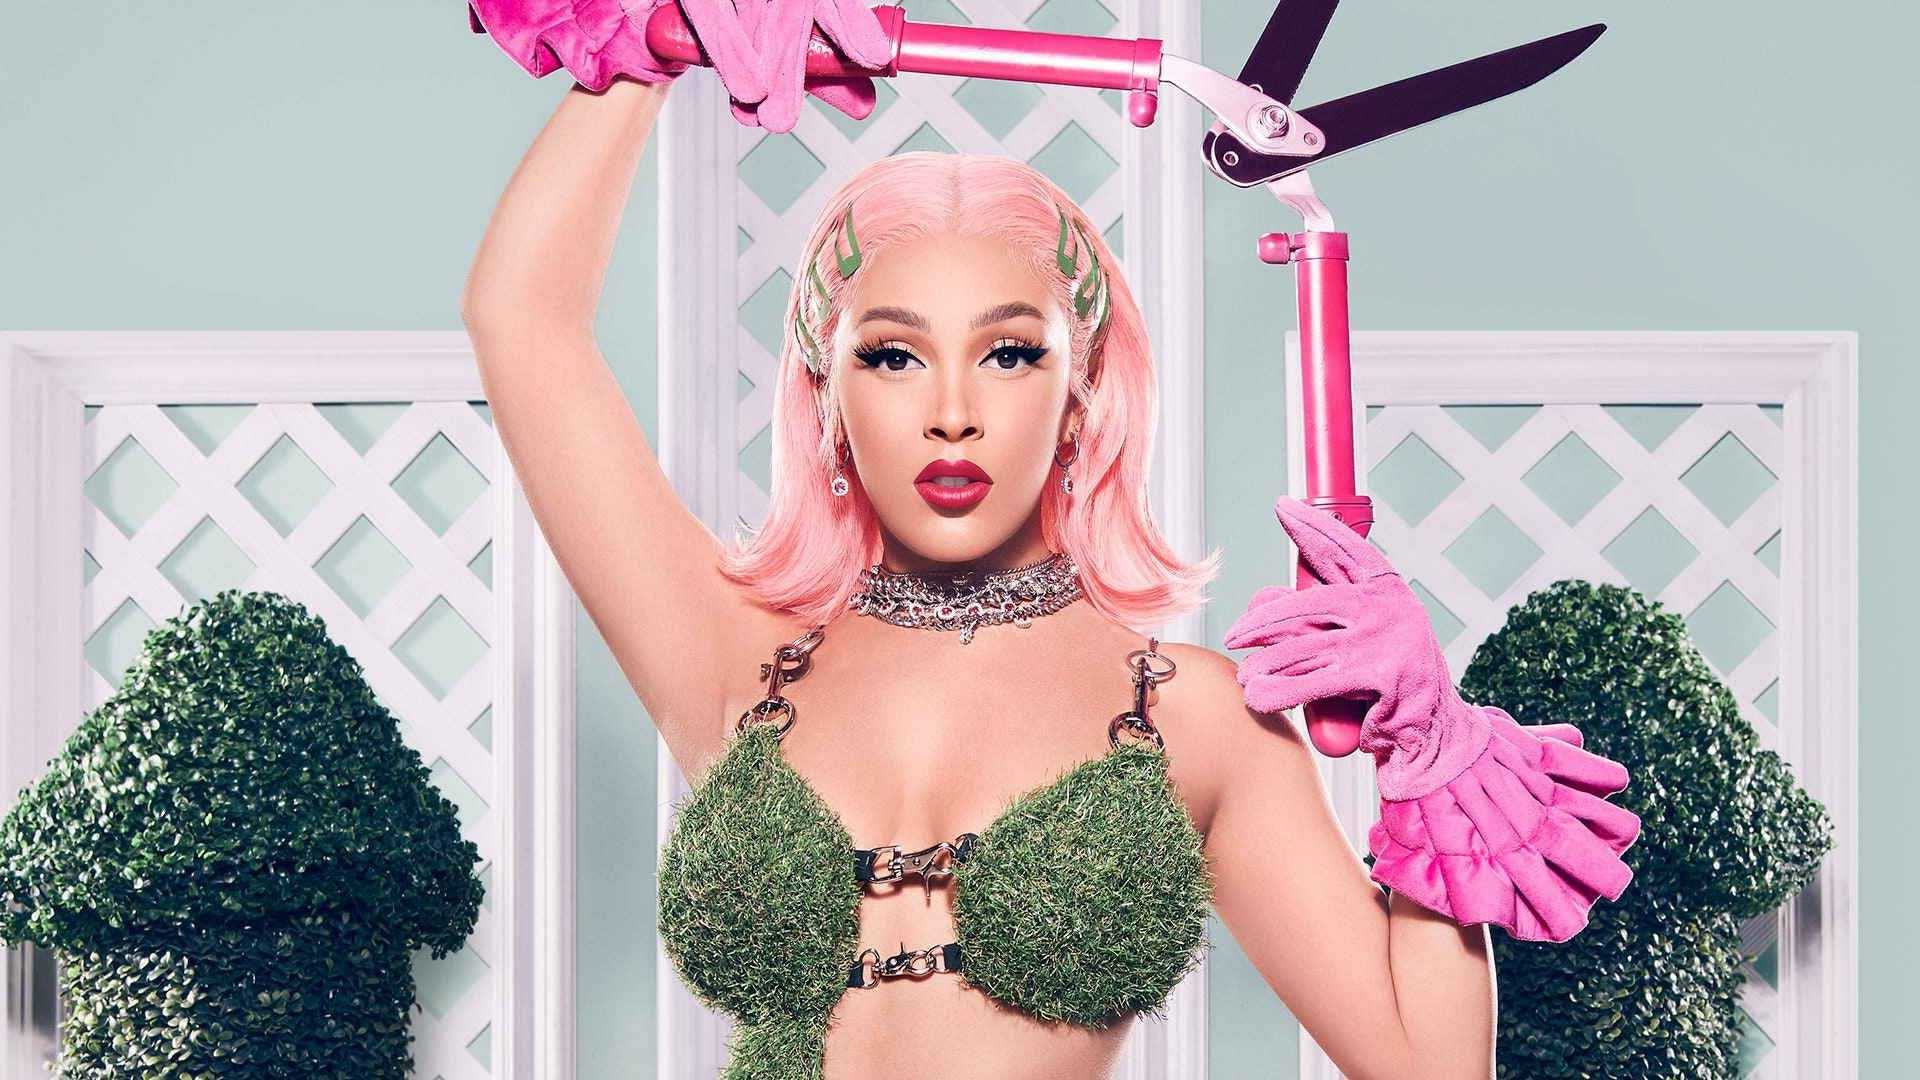 Cardi B in a grass bra and pink gloves holding pink pruning shears - Doja Cat